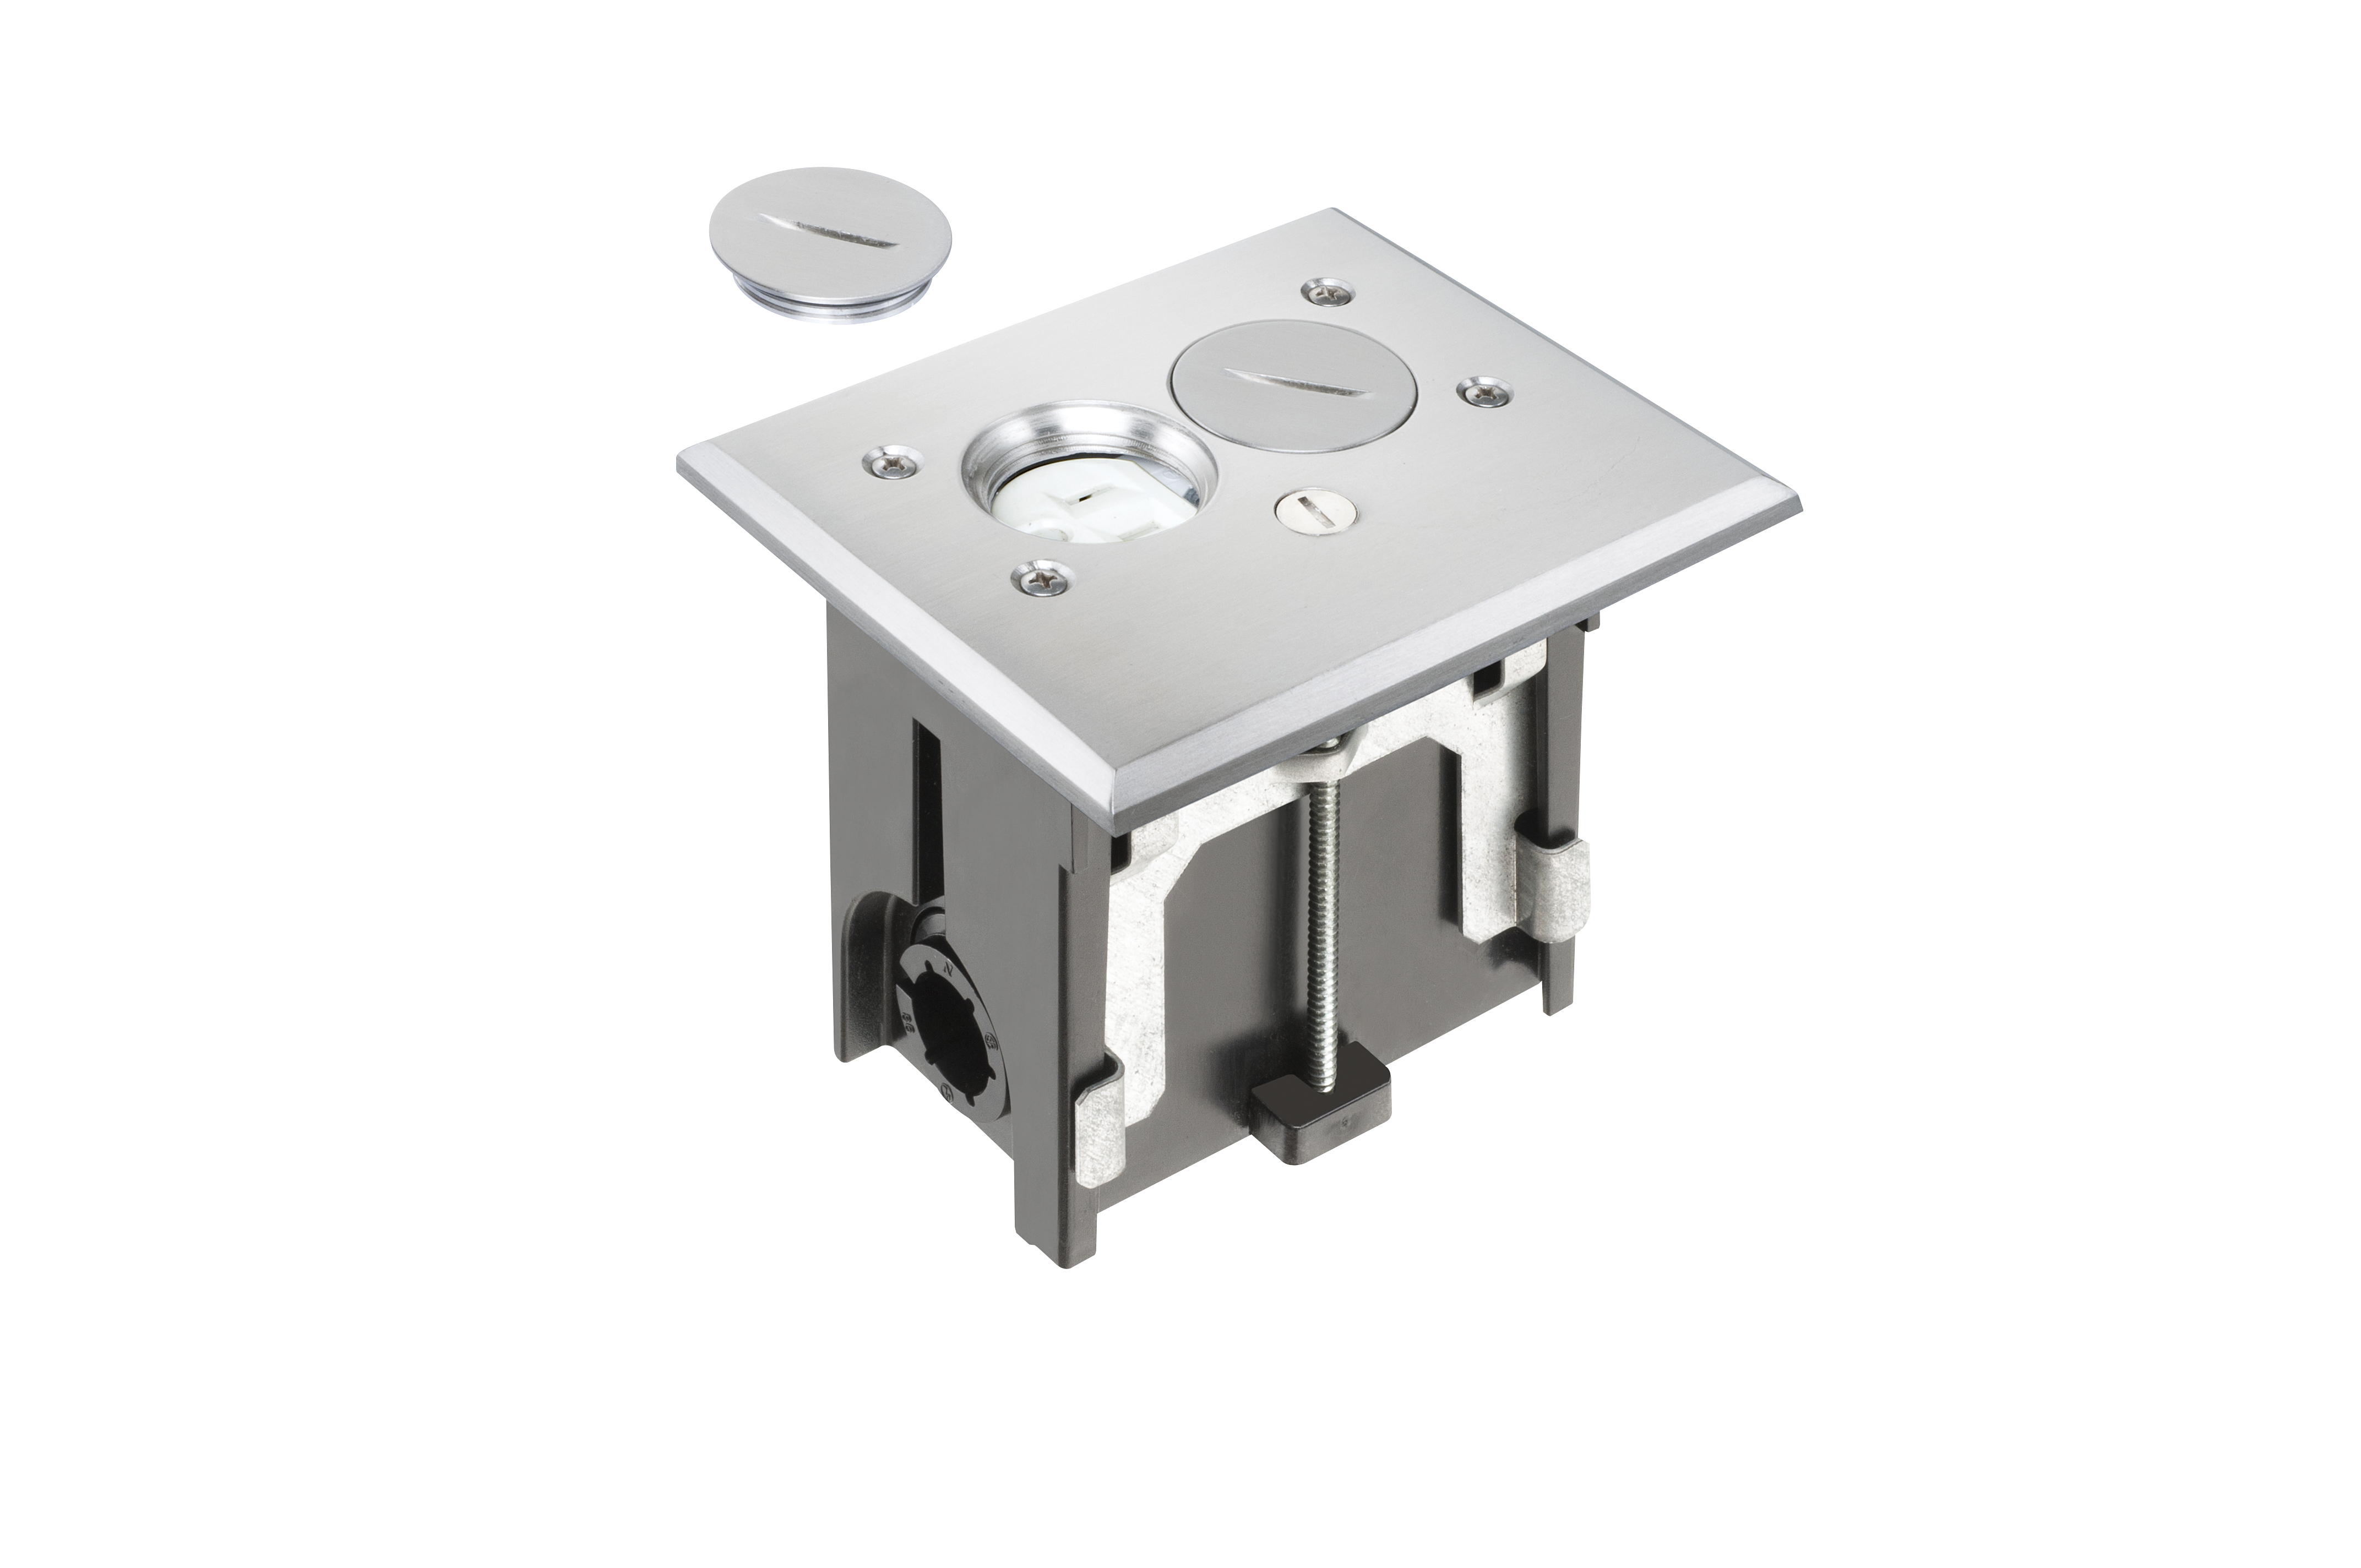 Metallic adjustable floor box. Nickel with threaded plugs. Includes tamper resistant duplex receptacle, cover plate with gasket and Arlington NM94 connector and Arlington NM900 knockout plug.